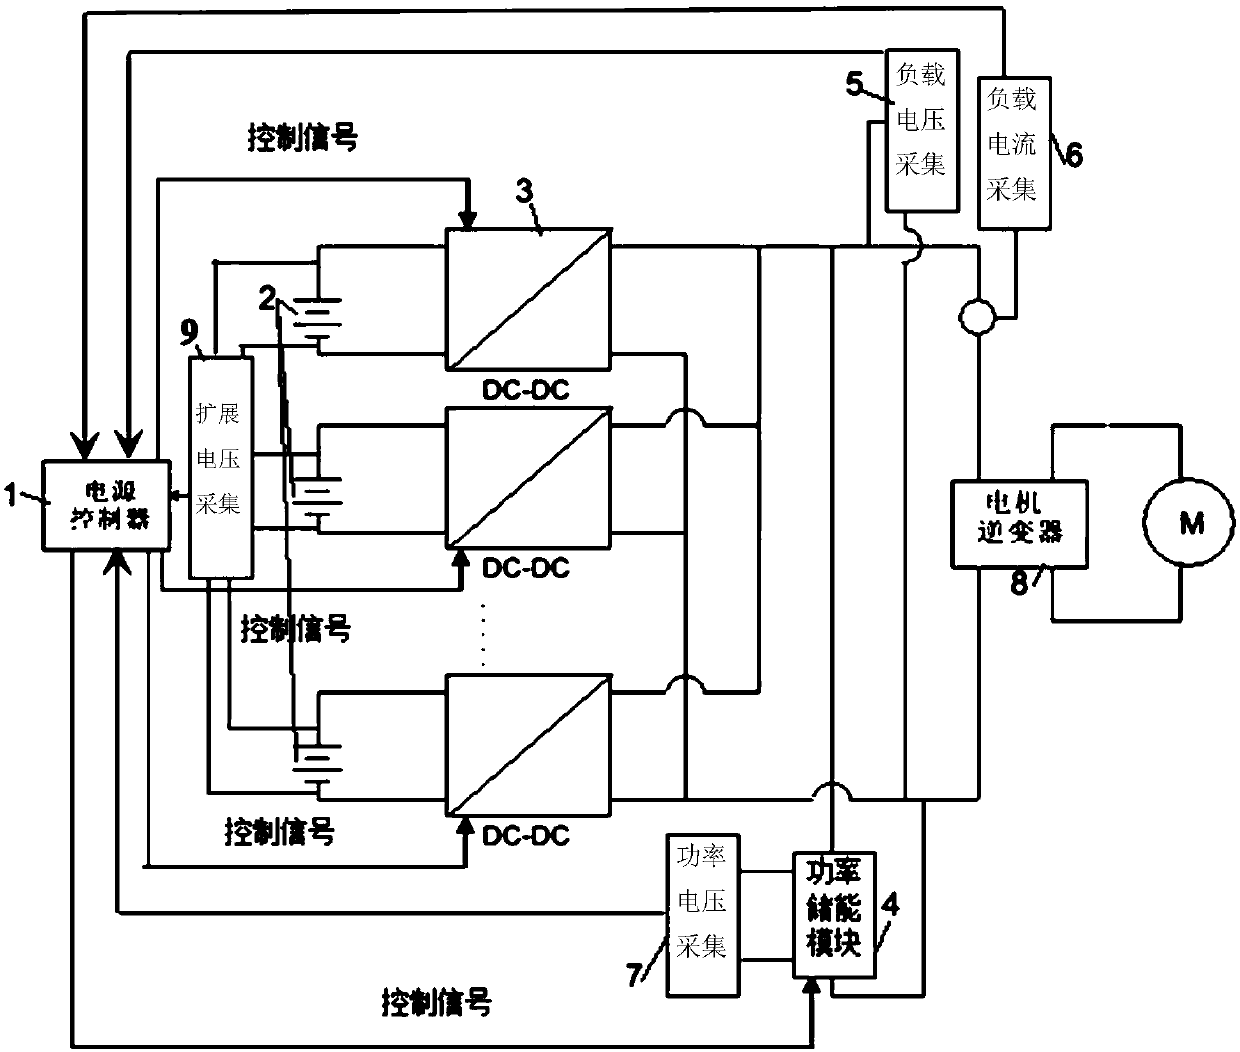 Composite power supply system